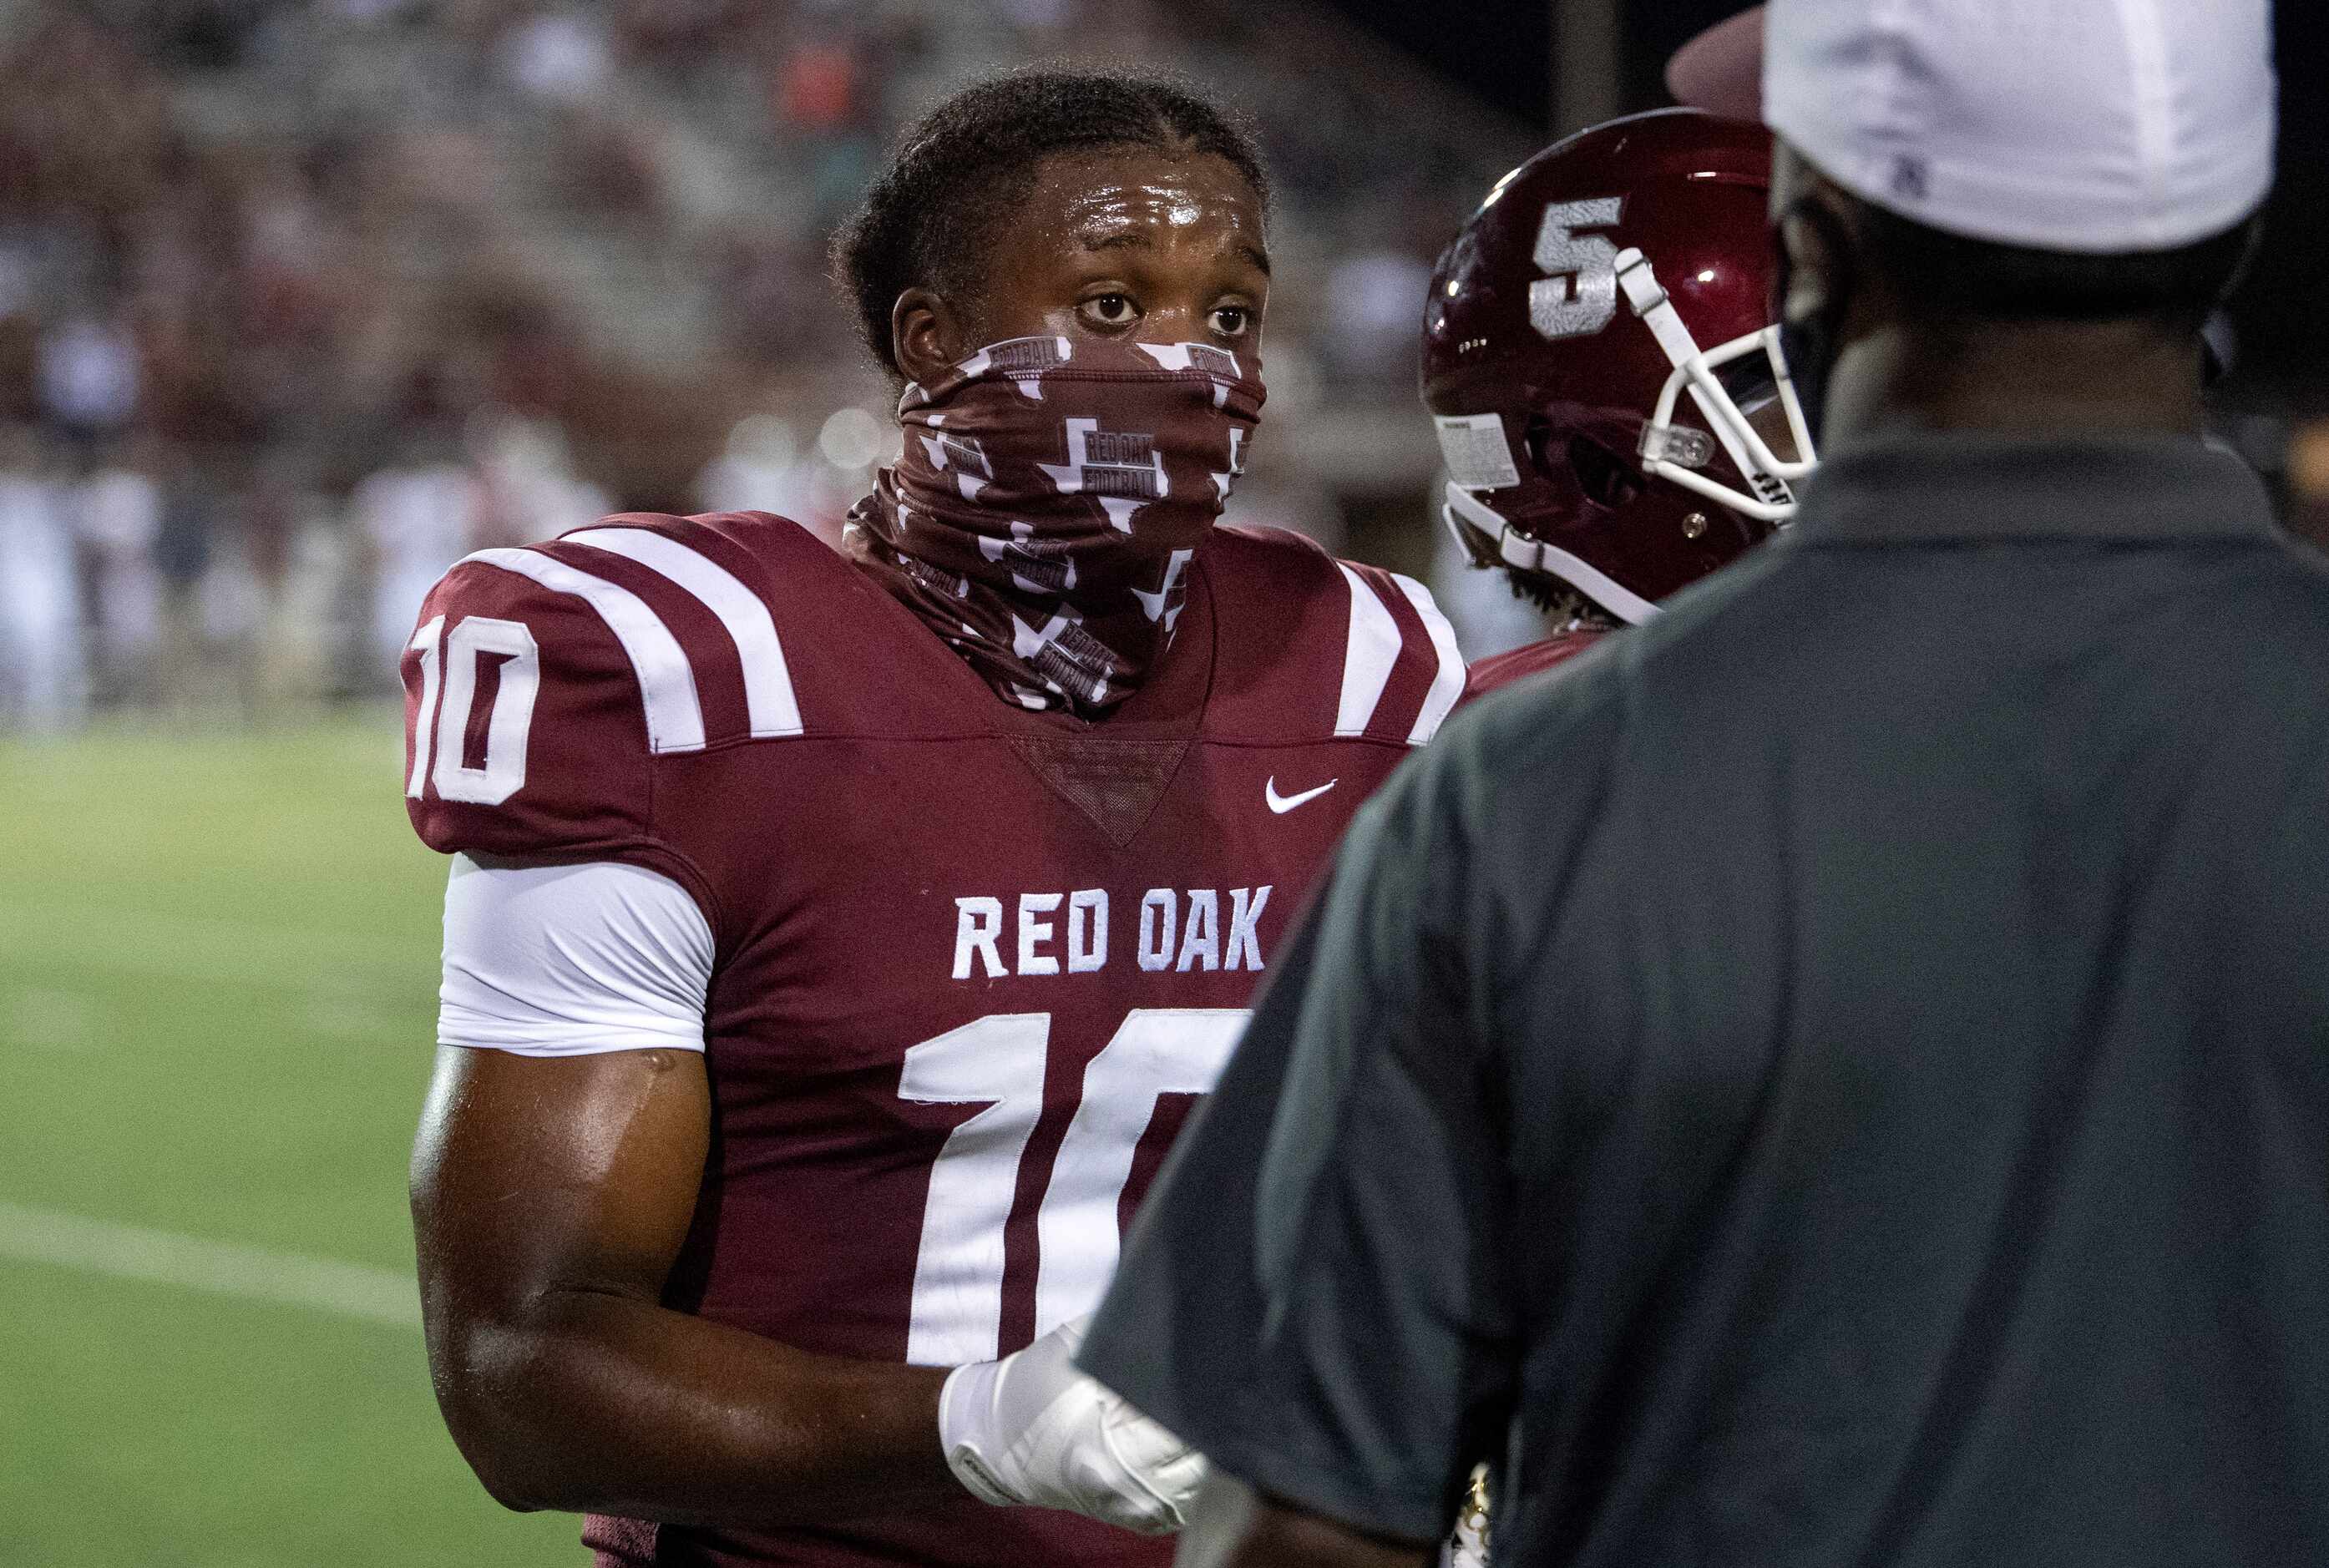 Red Oak senior Jaylyn Bennett (10) talks to a coach on the sidelines during the first half...